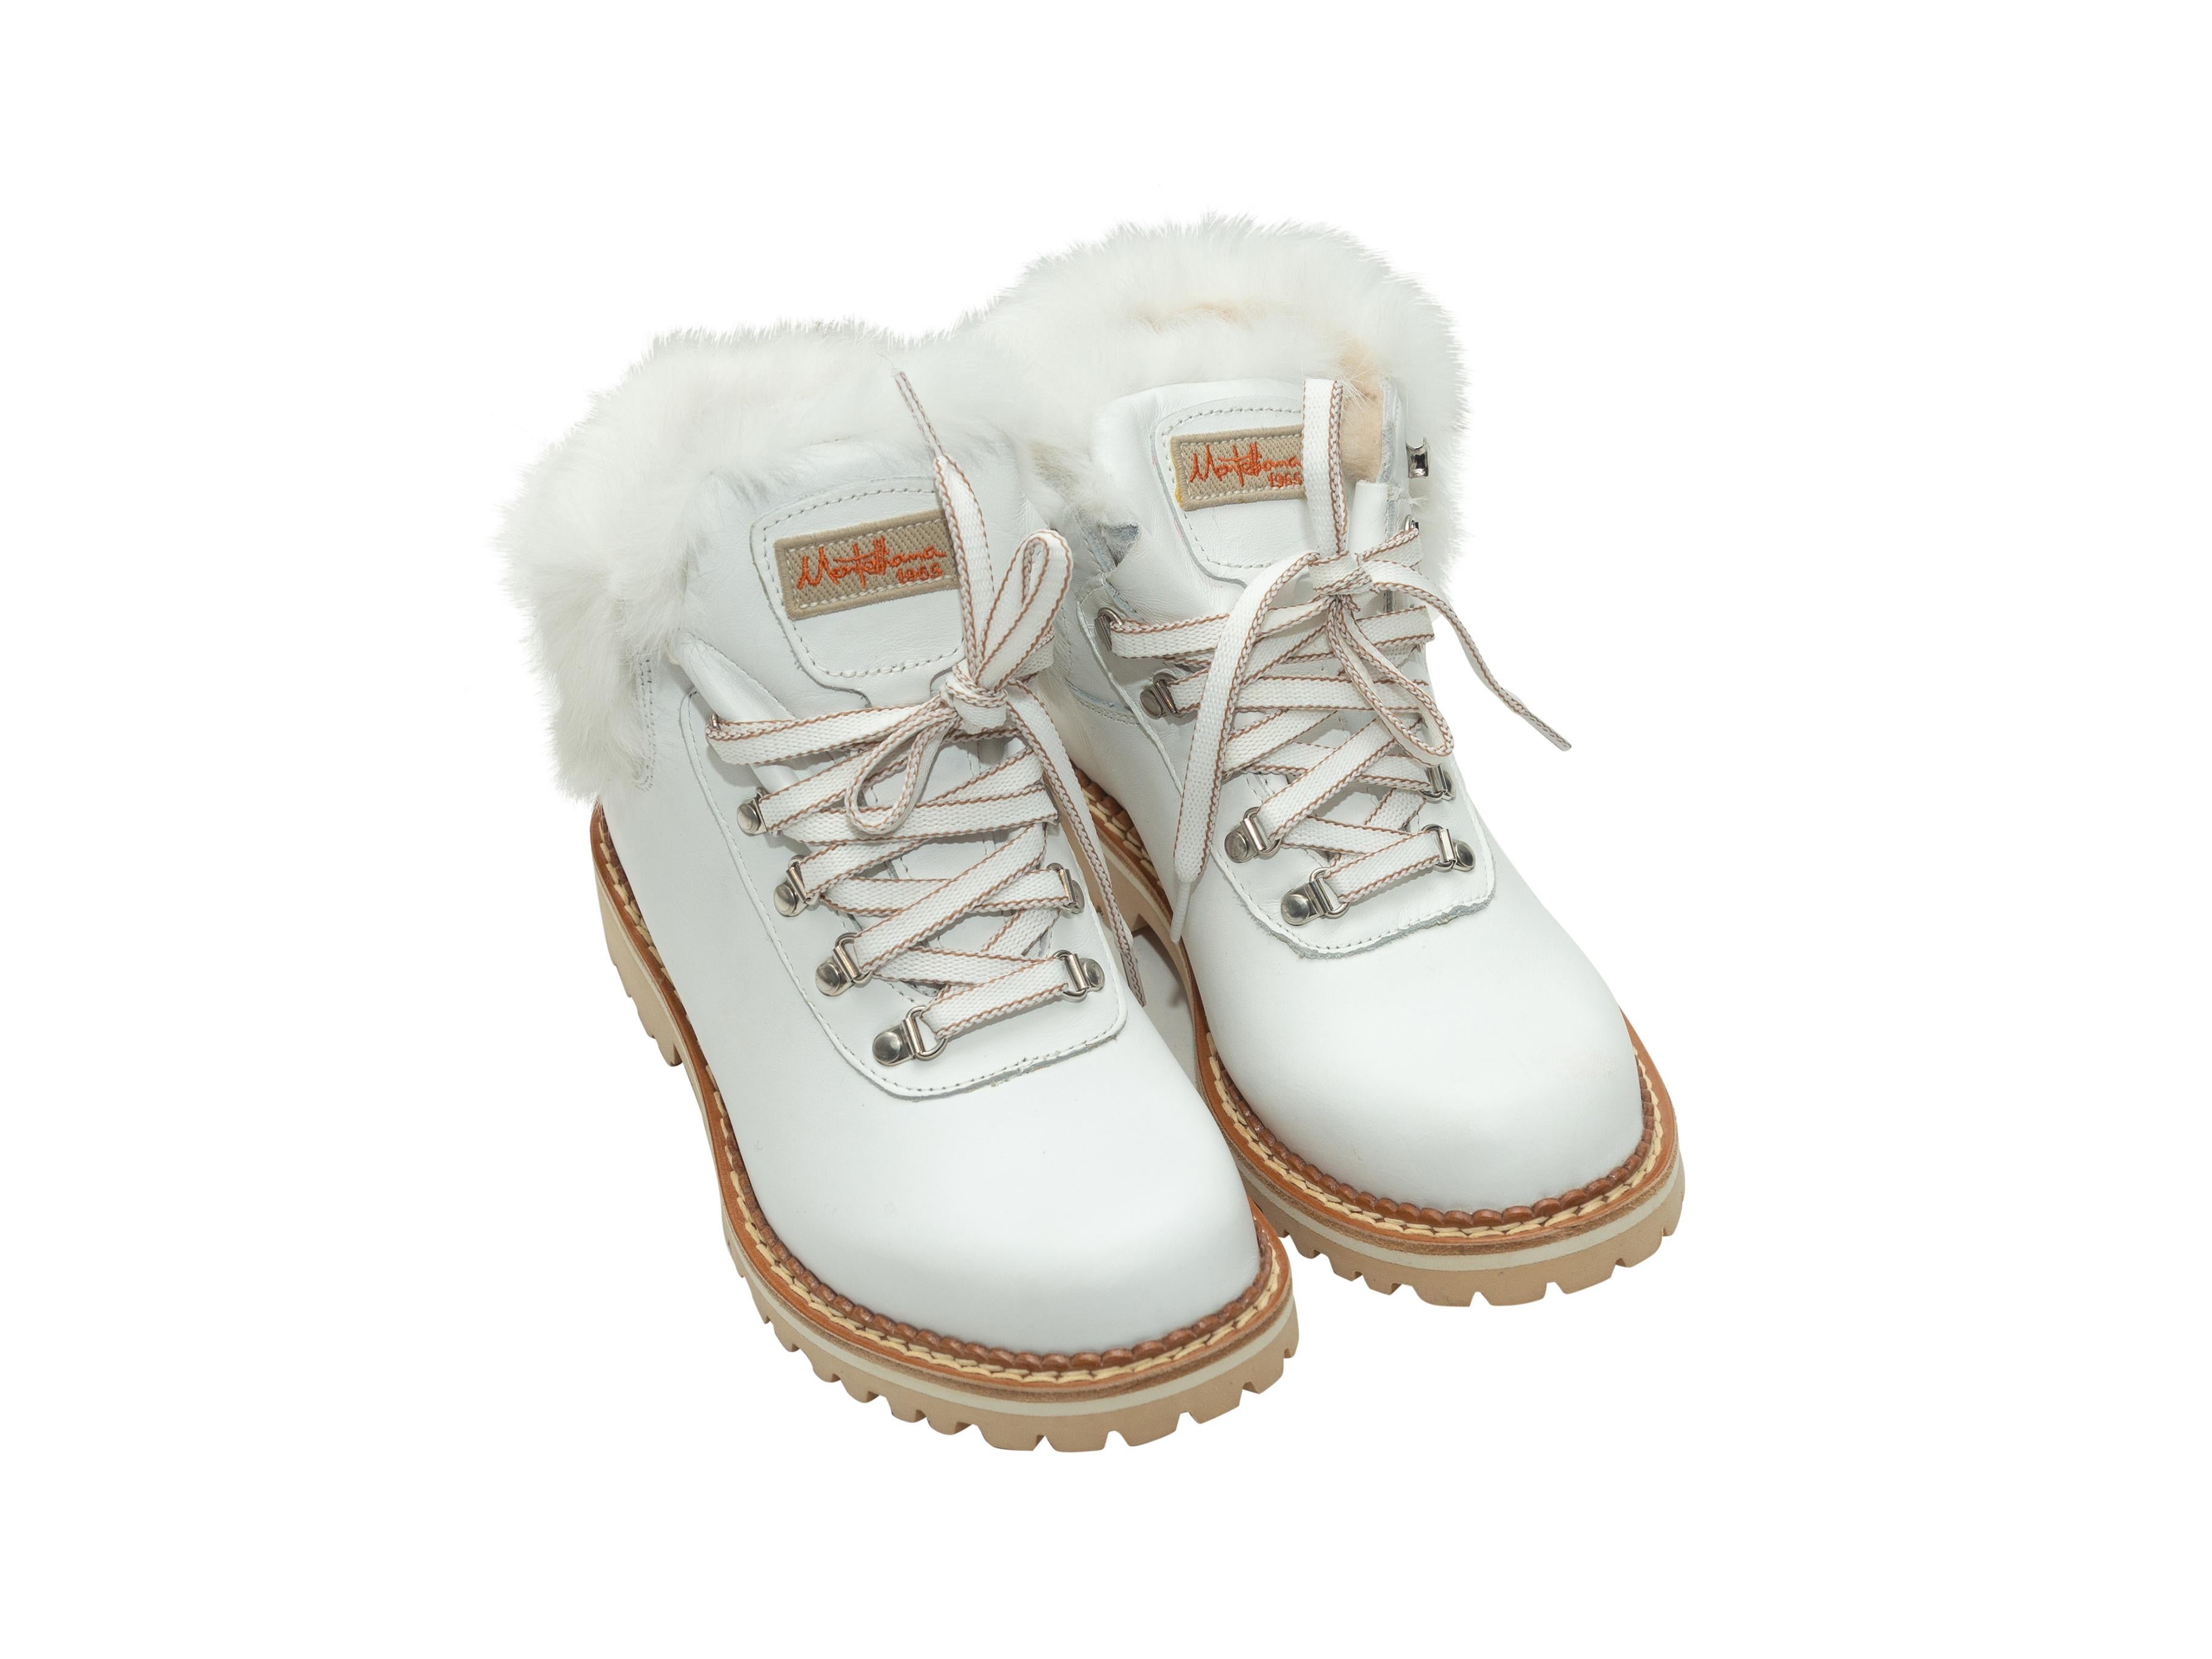 Product details: White leather round-toe fur-trimmed work boots by Montelliana. Lug soles. Lace-up tie closures at tops. 1.25